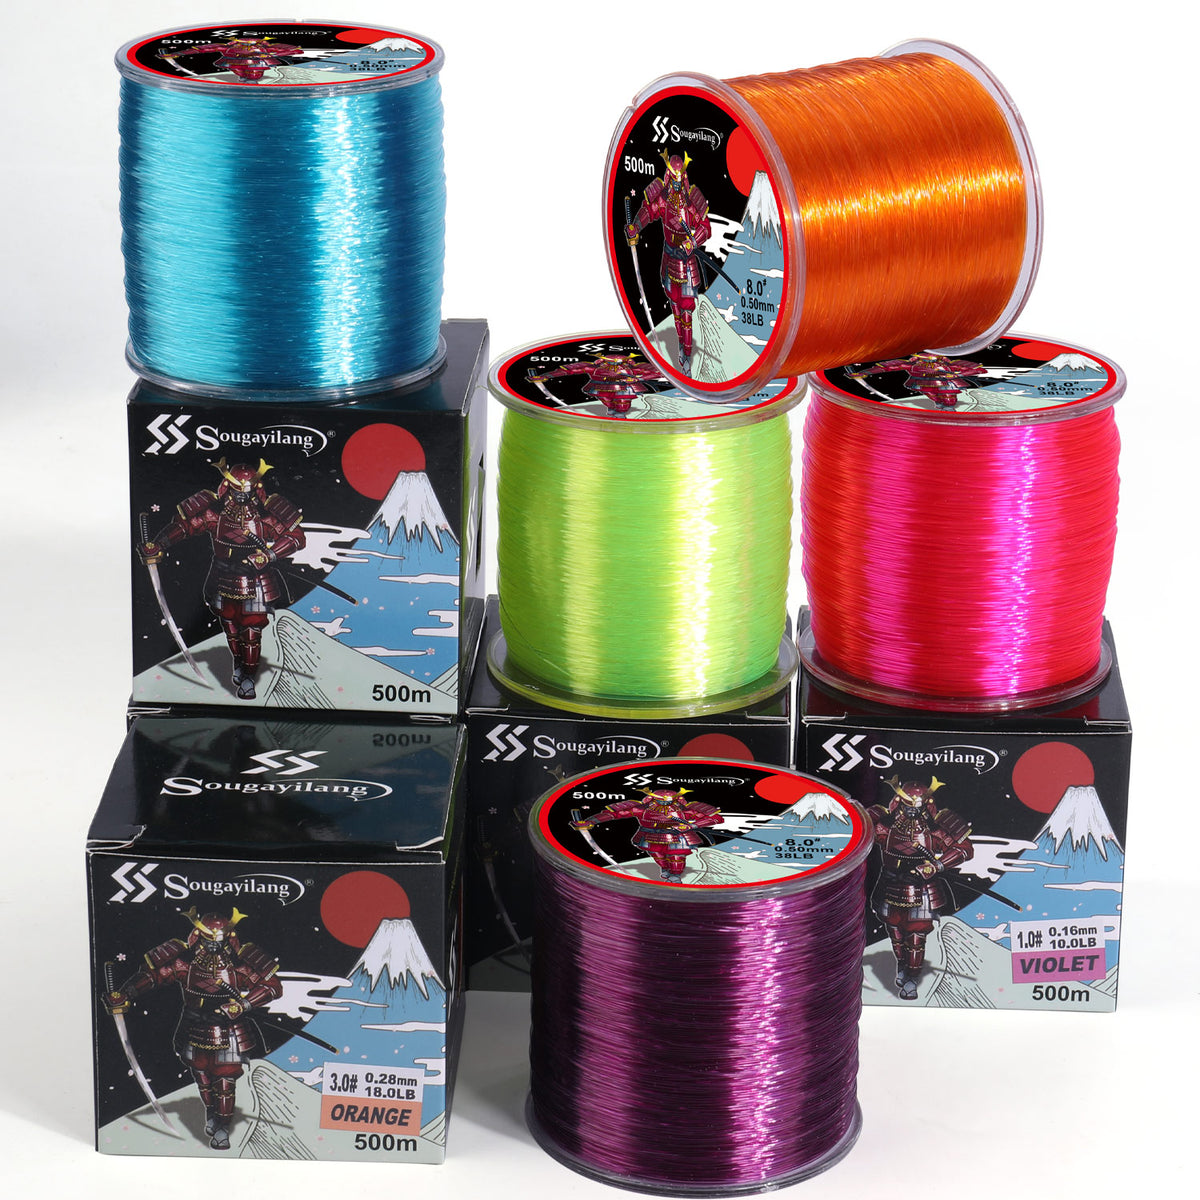 JIANGTAIGONG Monofilament Fishing Line,Superior Mono Nylon Fish Line Great substitute for Fluorocarbon Fishs Line, 100 Meters Abrasion Resistant Fly